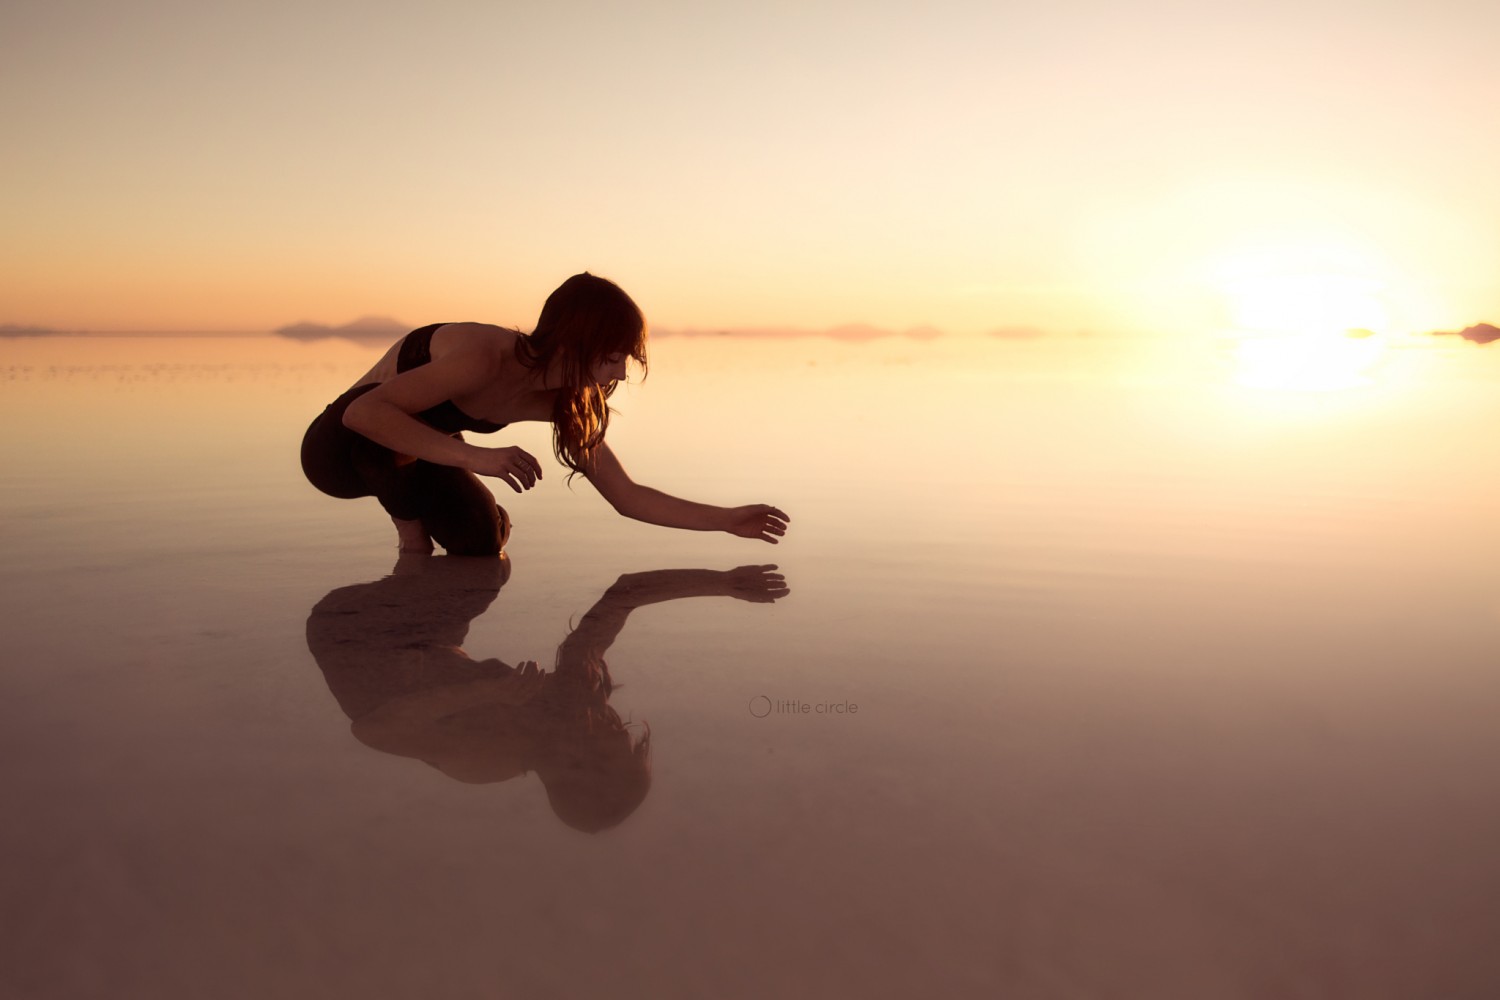 Photographing in the Largest Salt Desert on the Planet